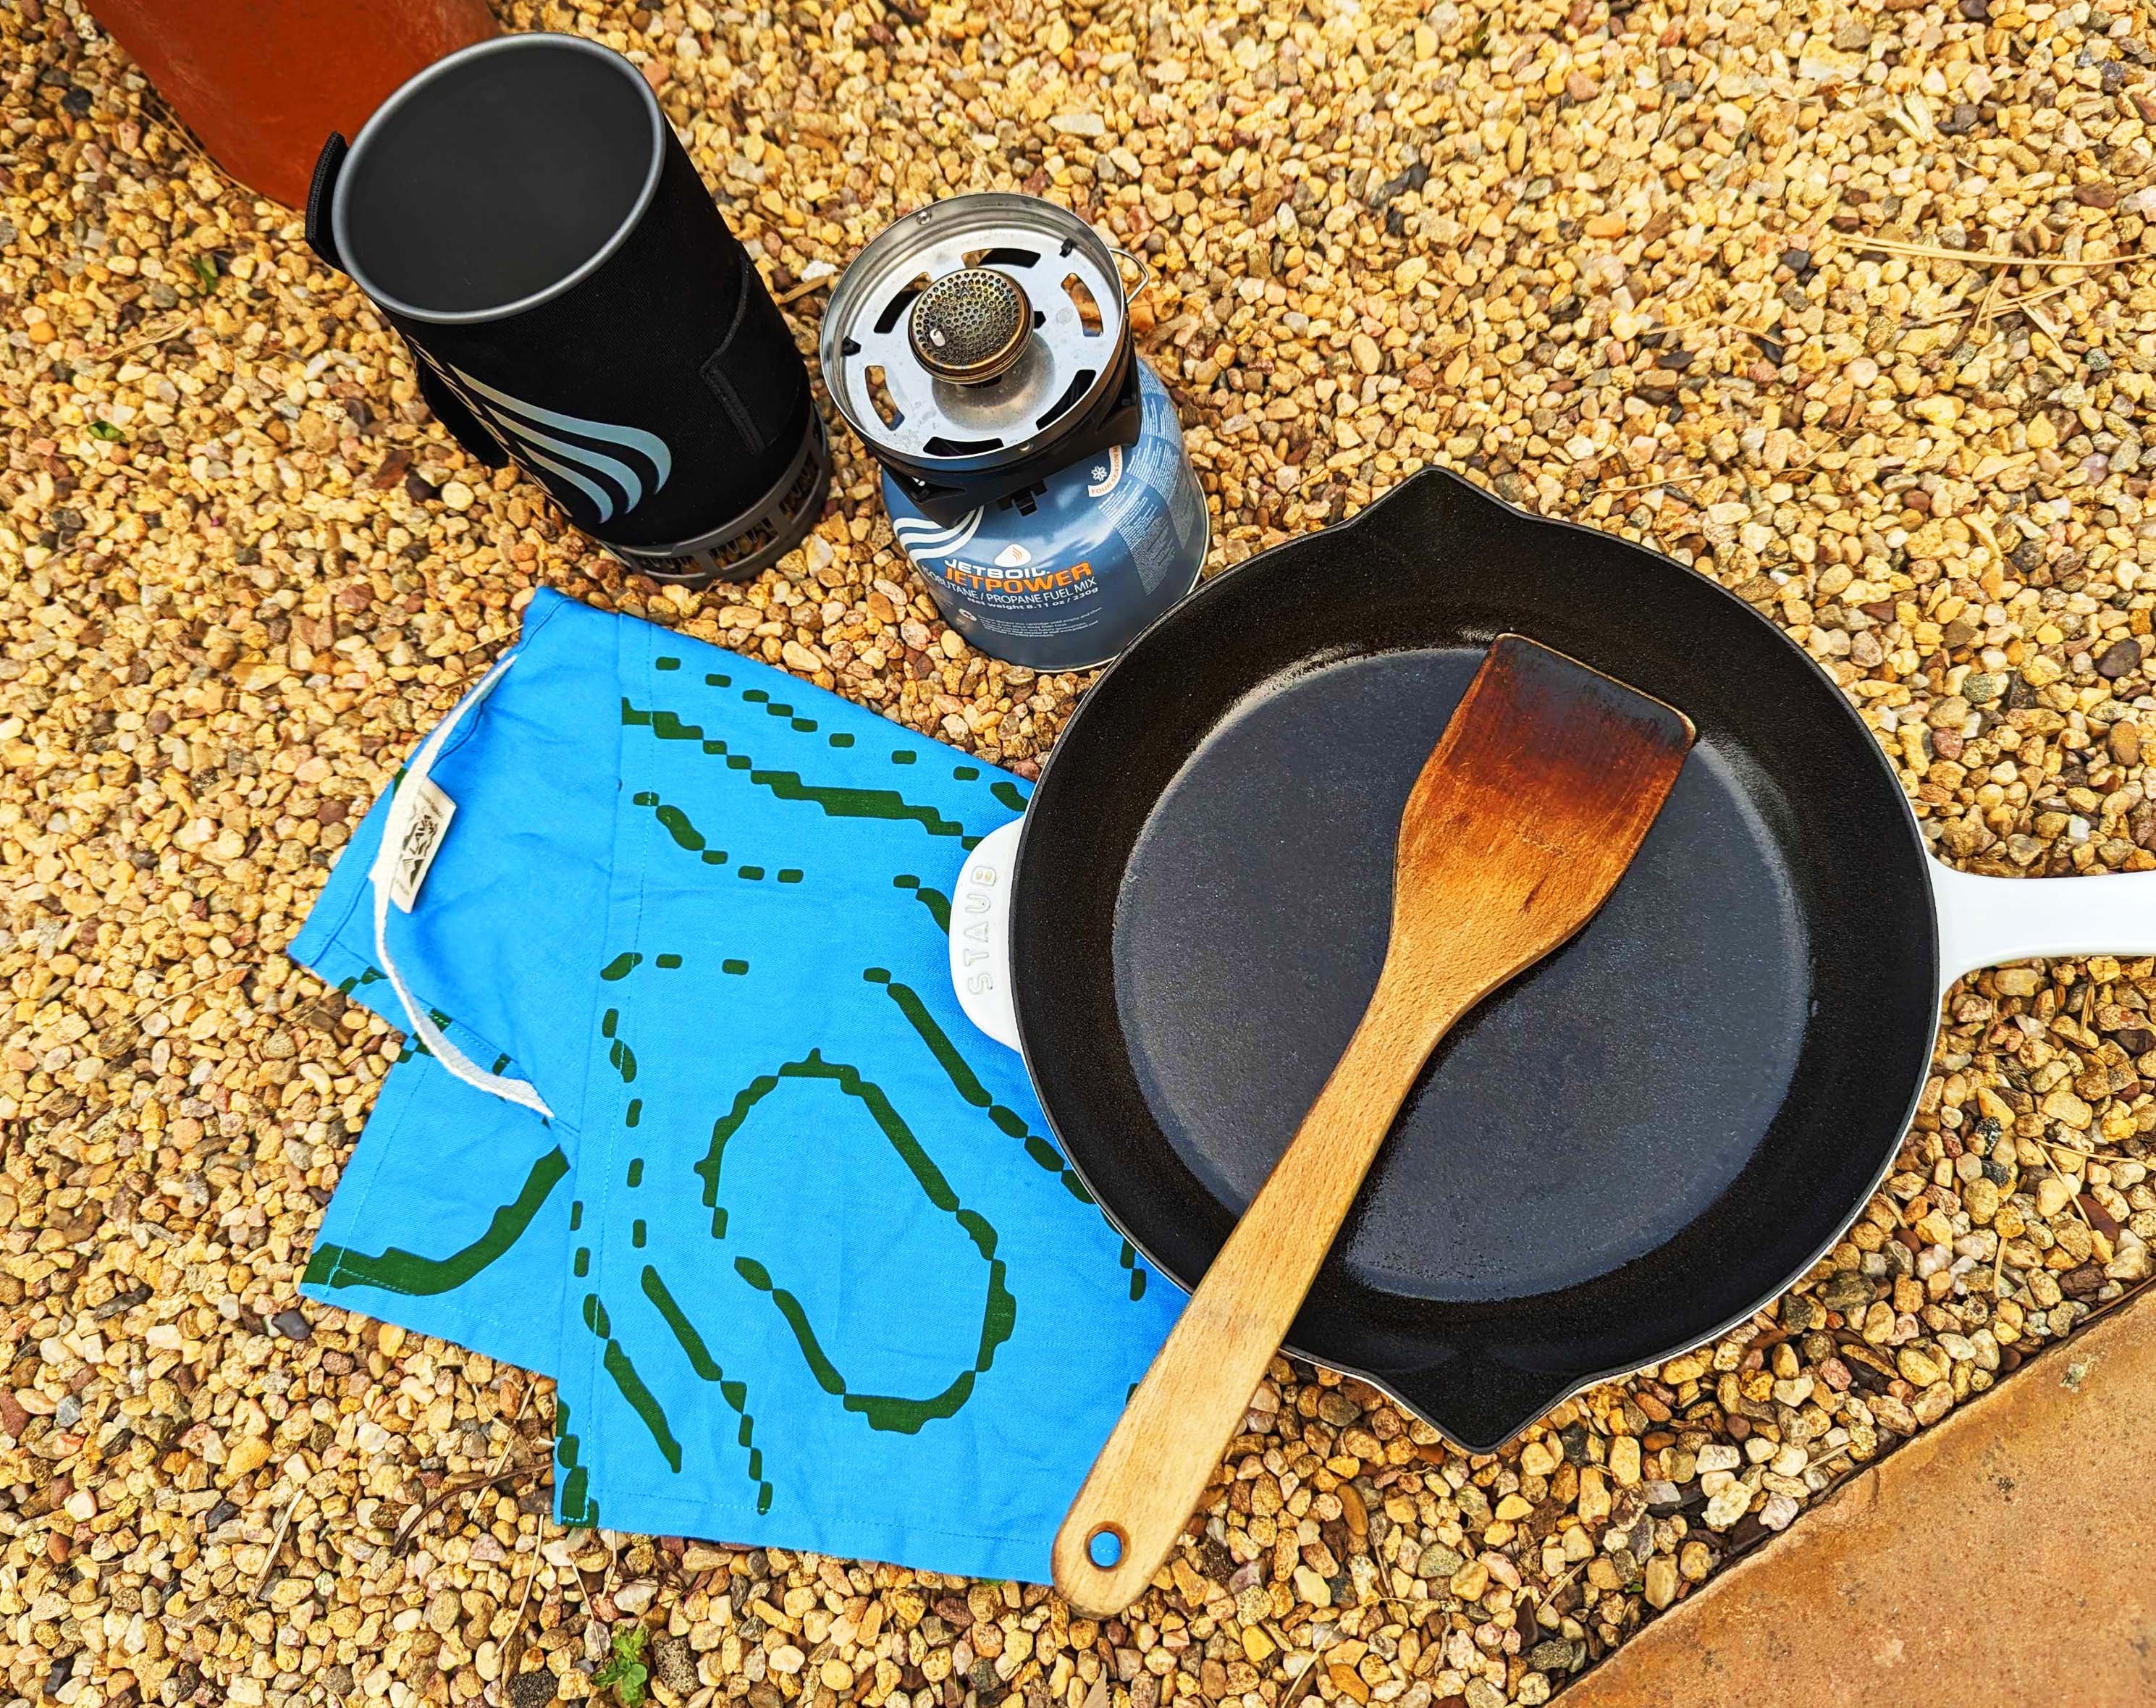 camp cooking gear